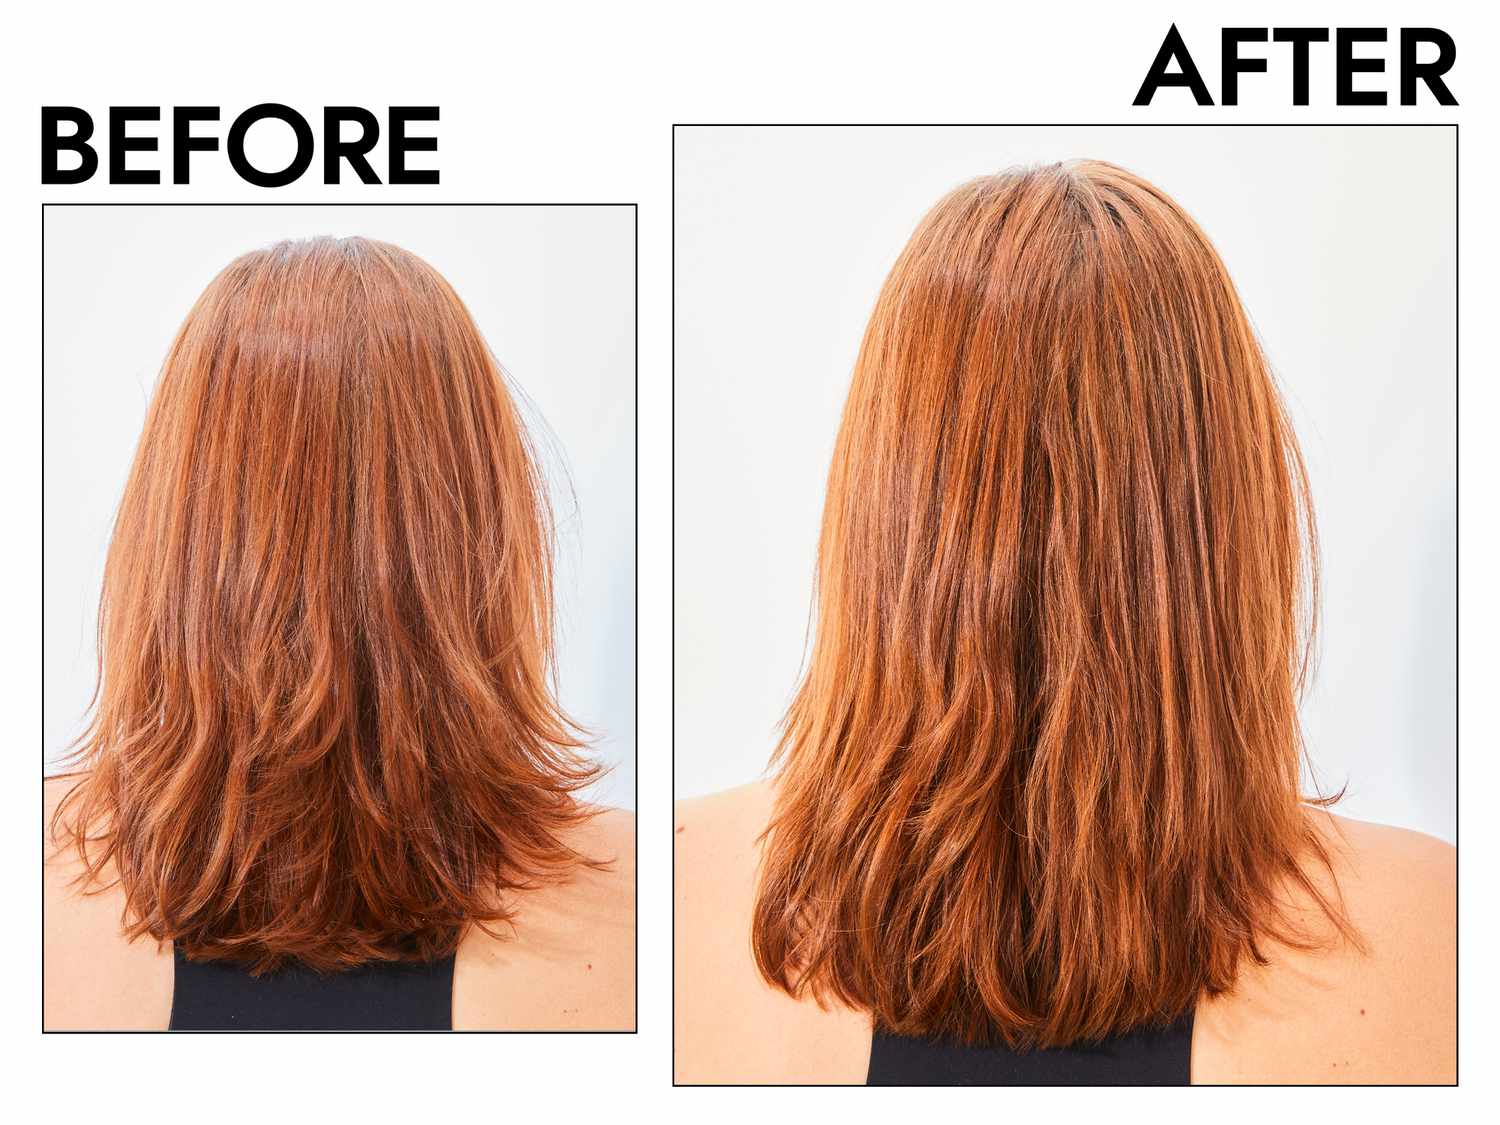 The back of a head with red hair before and after using a heat protectant